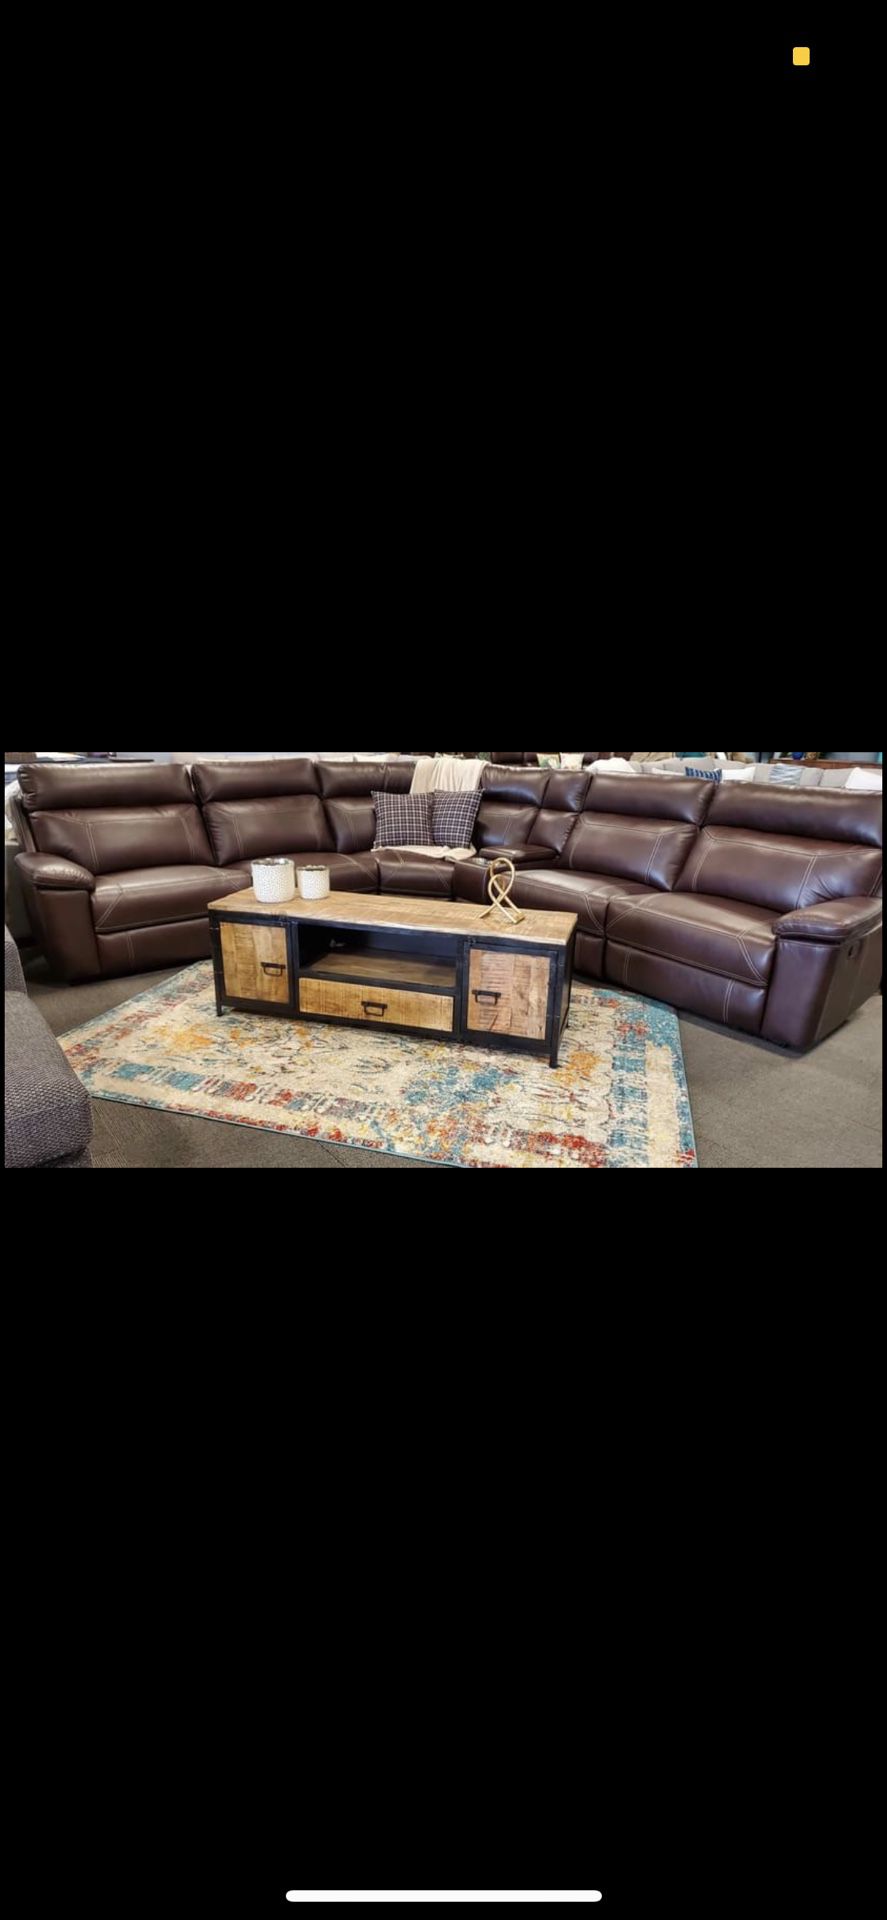 Large dark brown reclining sofa sectional- amazing price & brand new- can have delivered in a week!